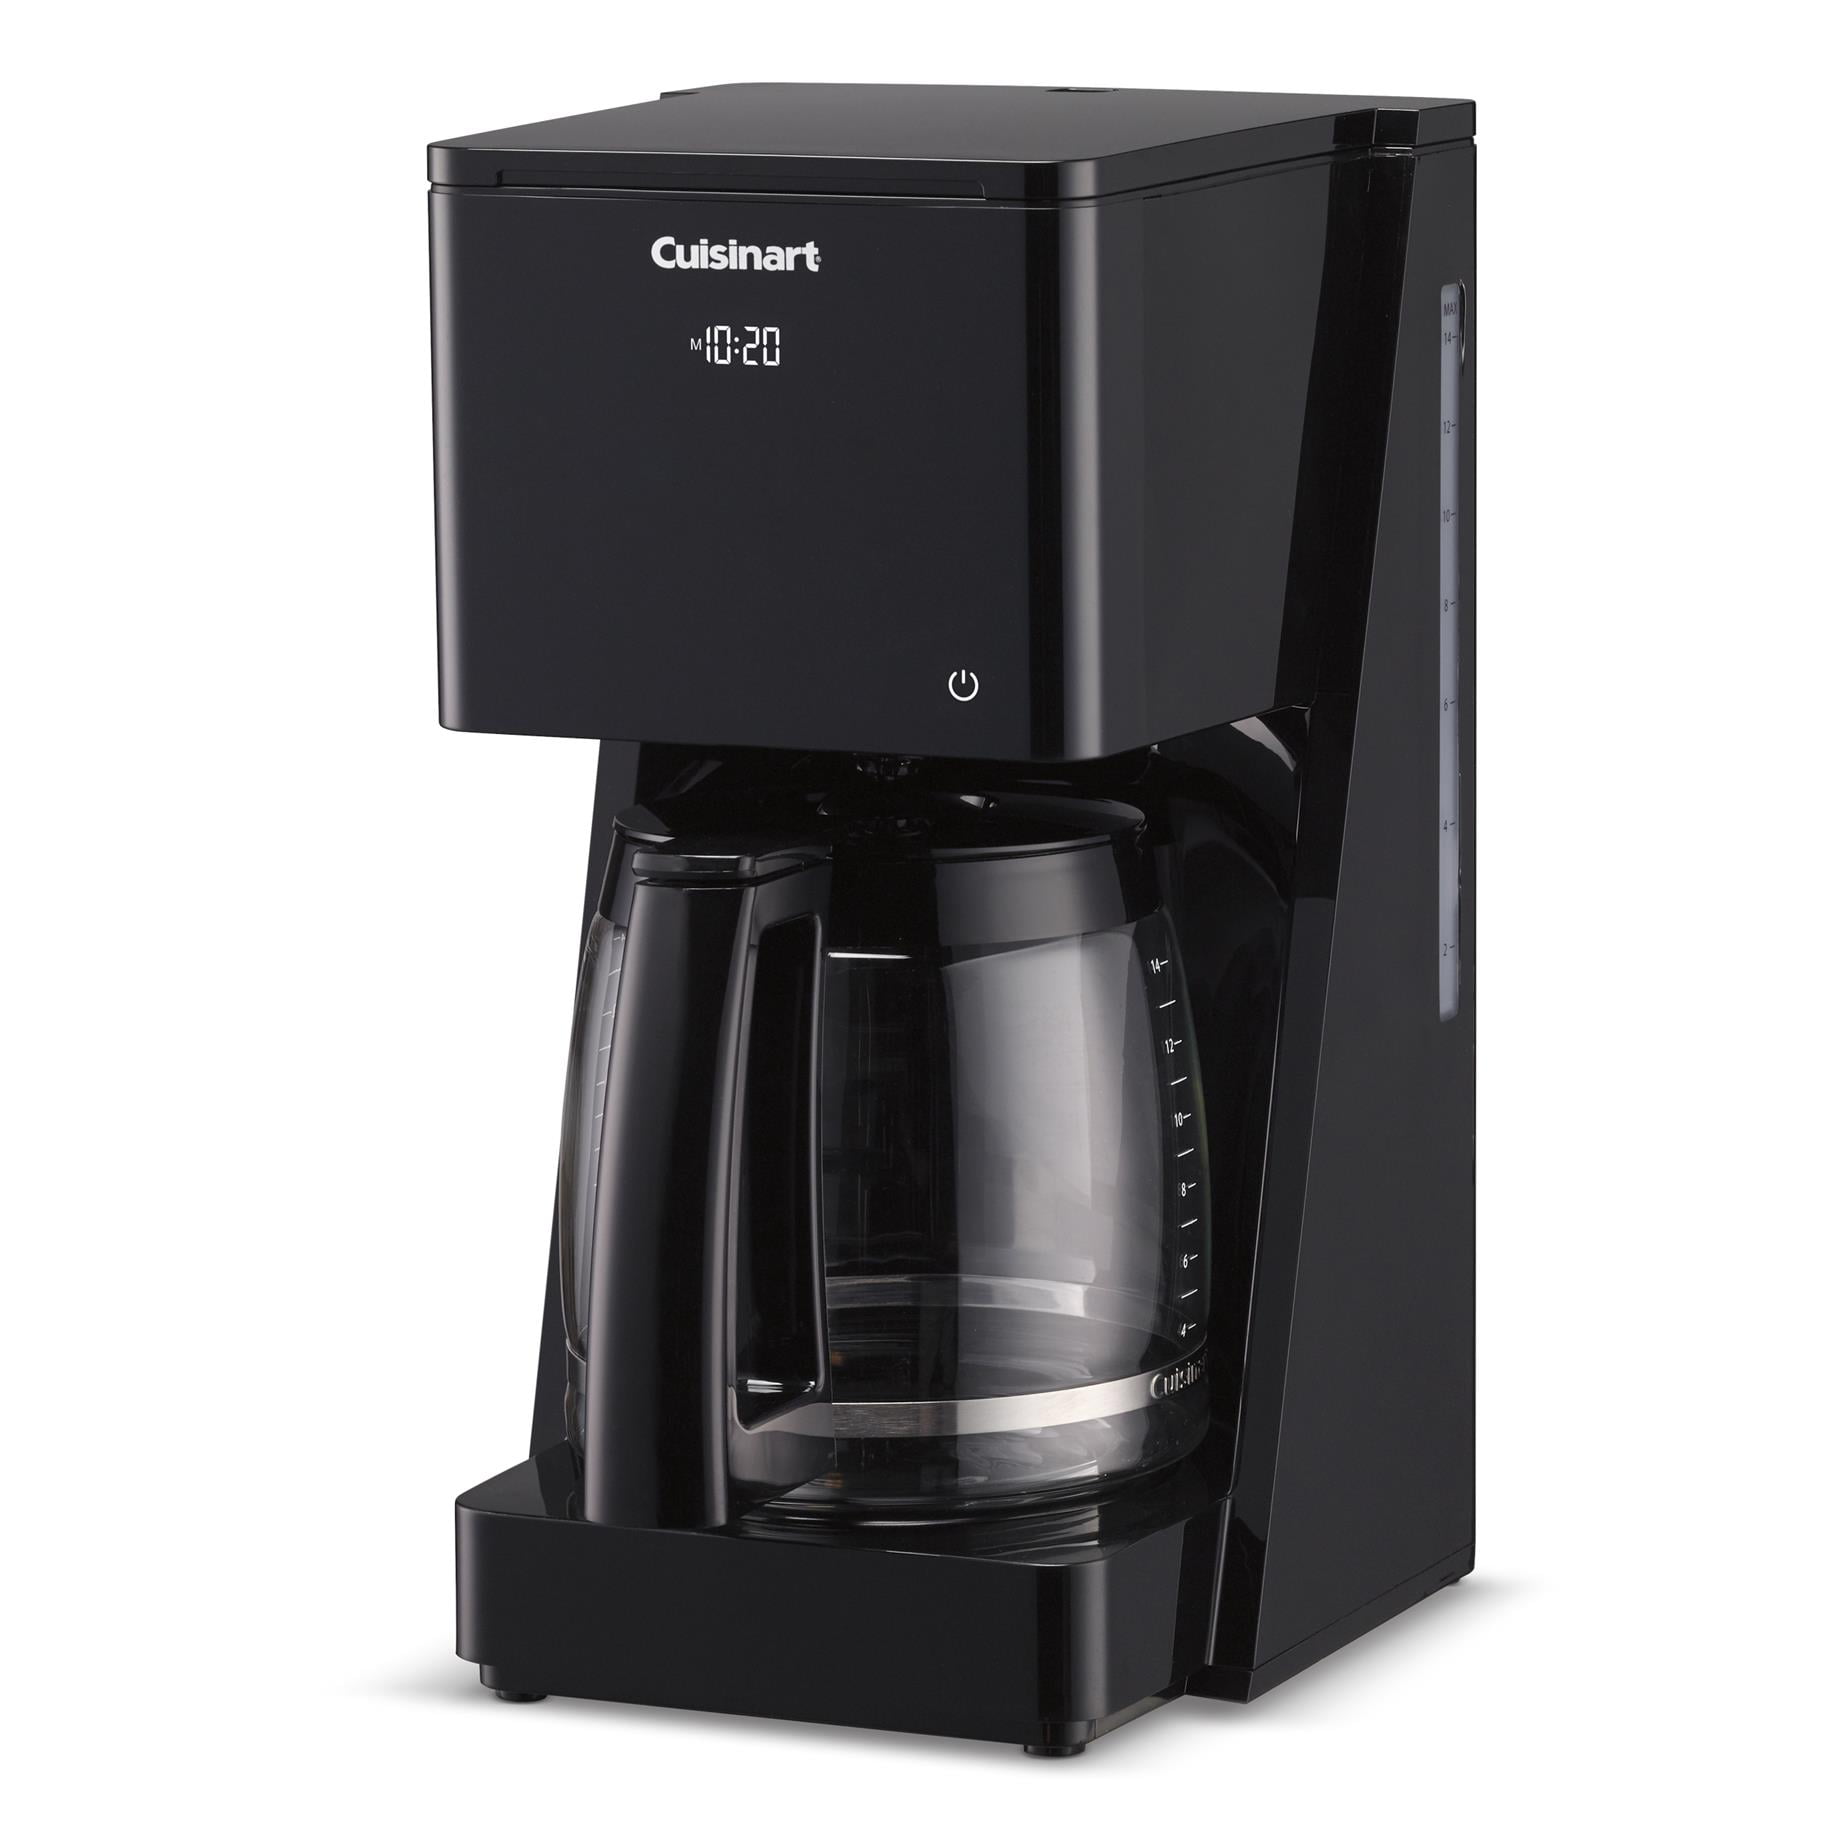 Do You Need the Cuisinart Soft Serve Ice Cream Maker? — The